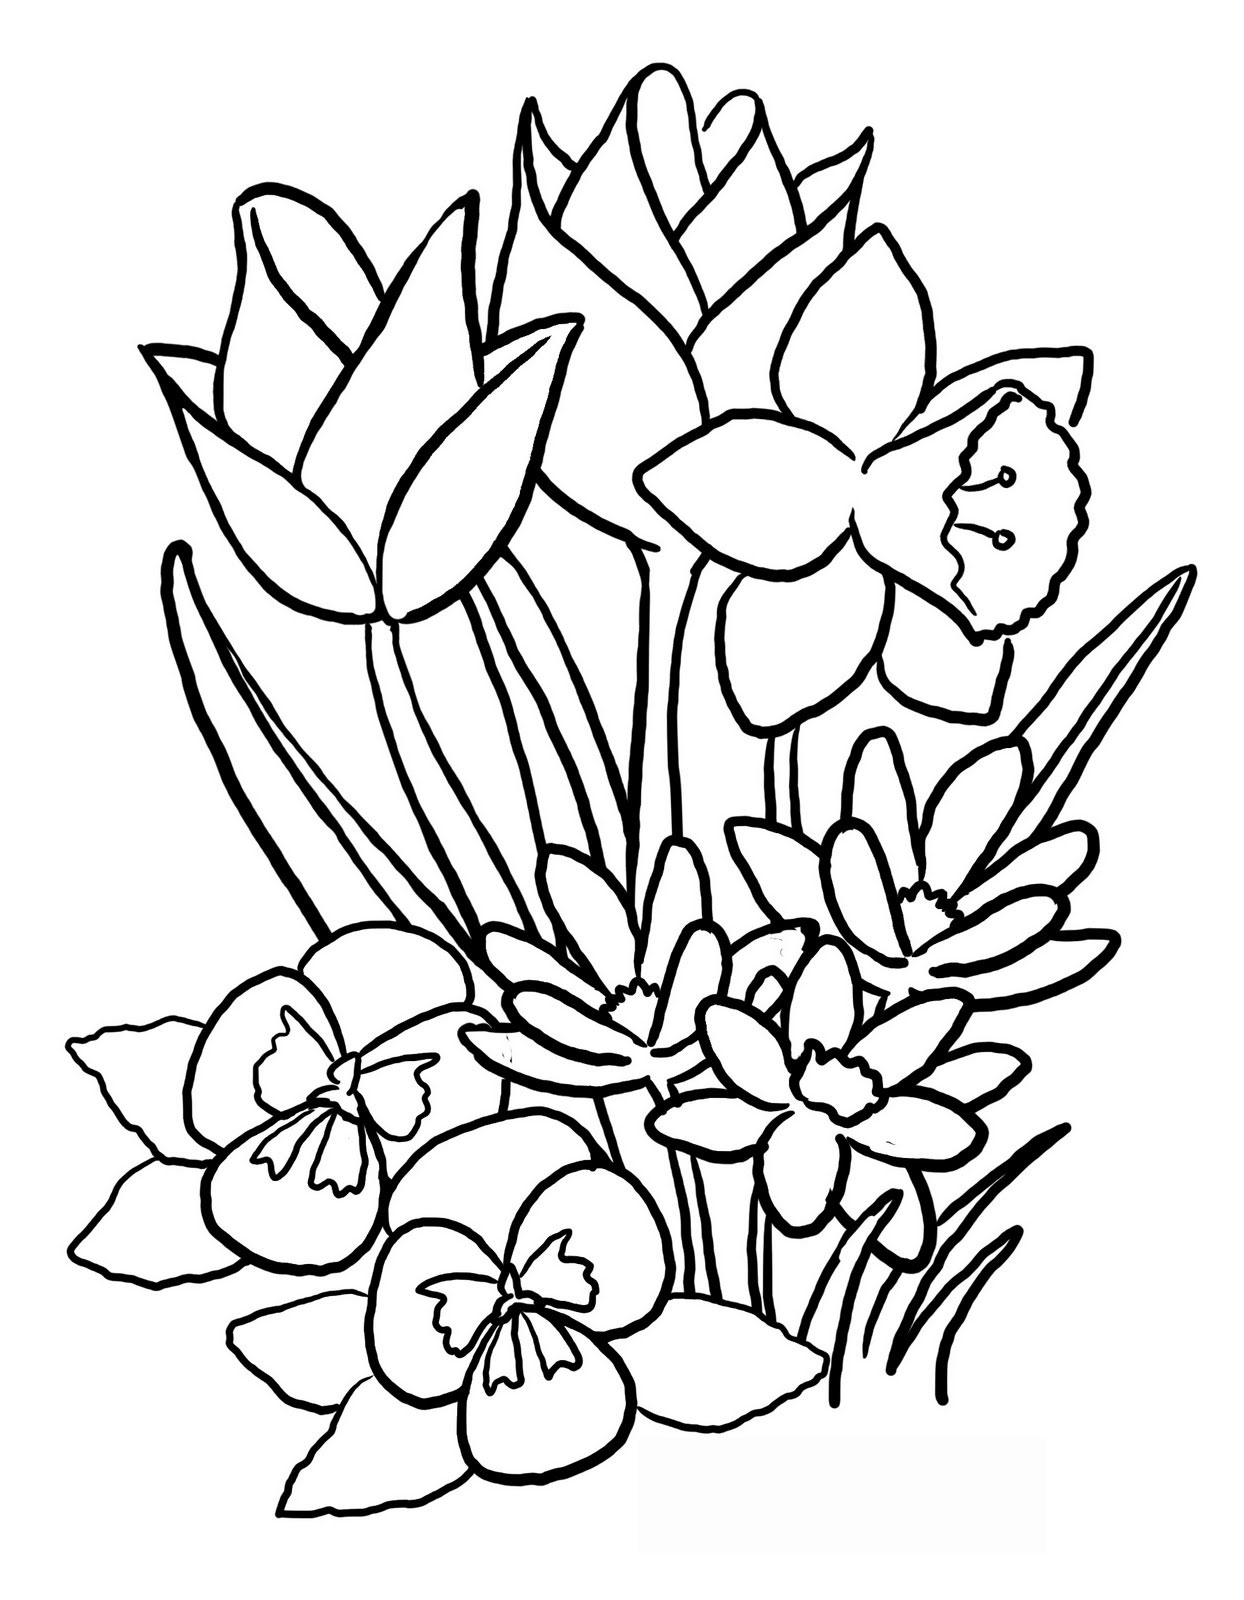 free spring clipart black and white - photo #21